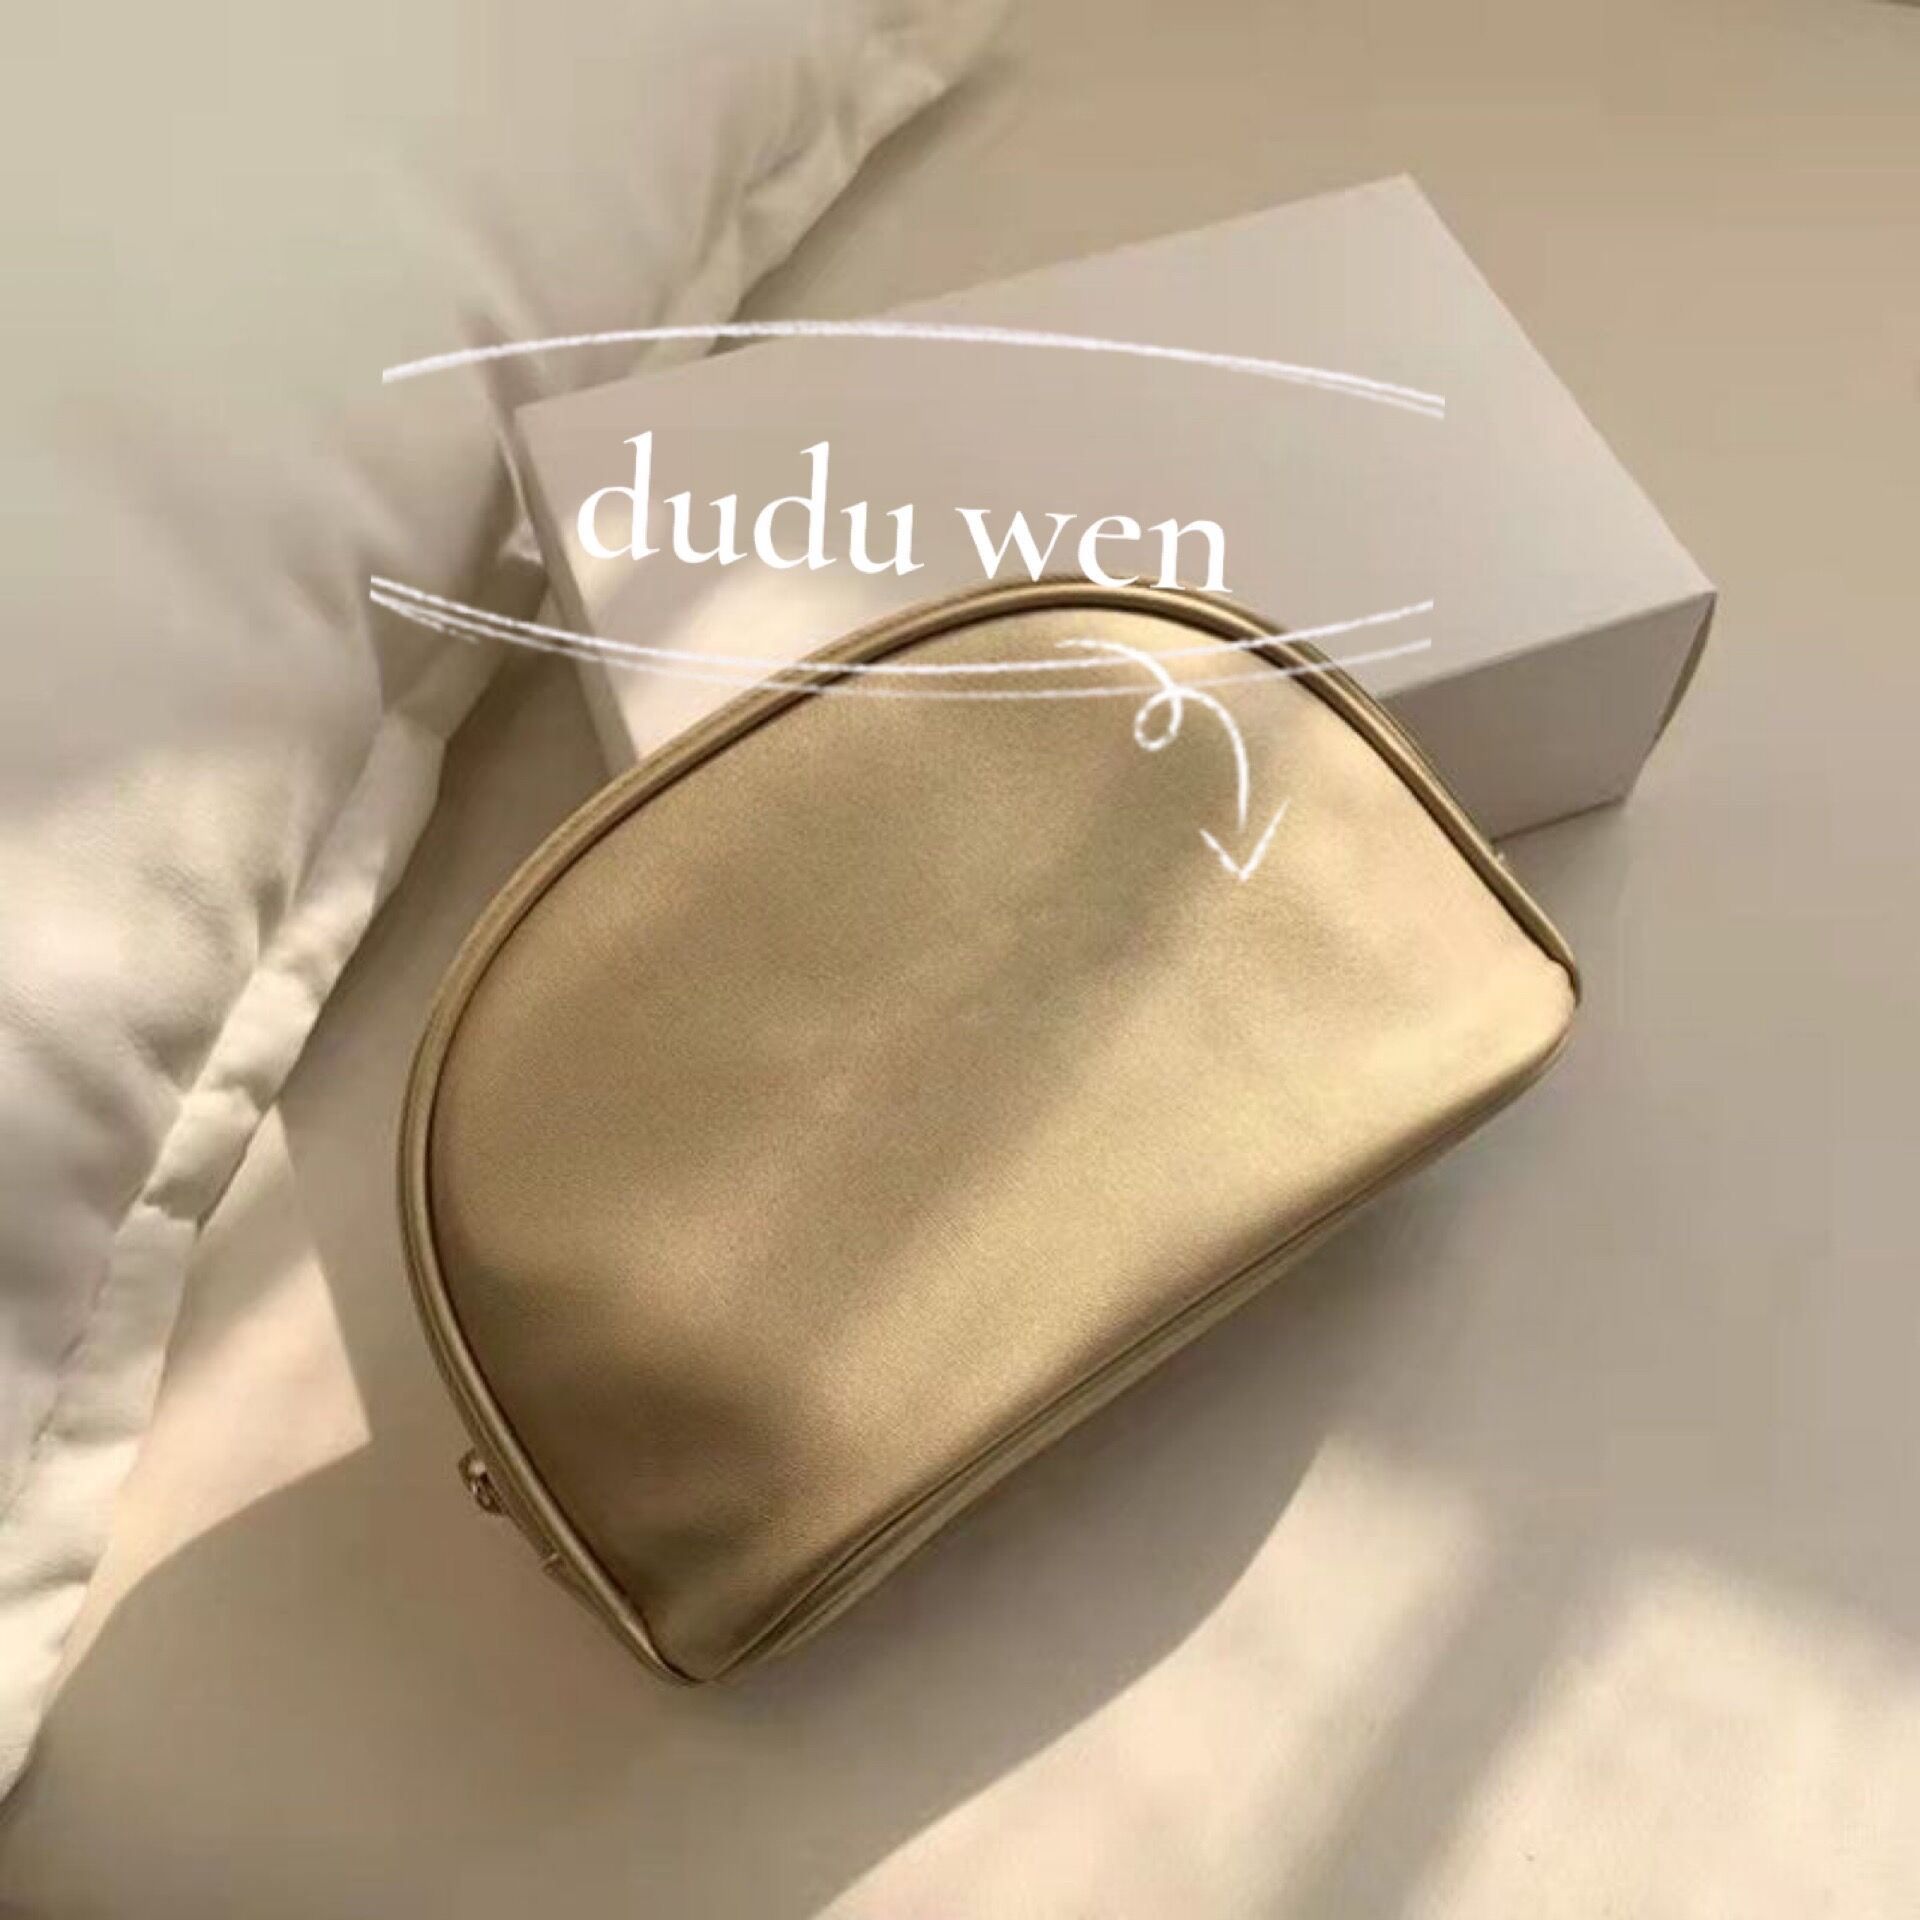 

19.5X7X13.5cm fashion gold color zipper bag elegant smartCC beauty cosmetic case luxury makeup organizer bags with packing box duduwenforvip counter gift